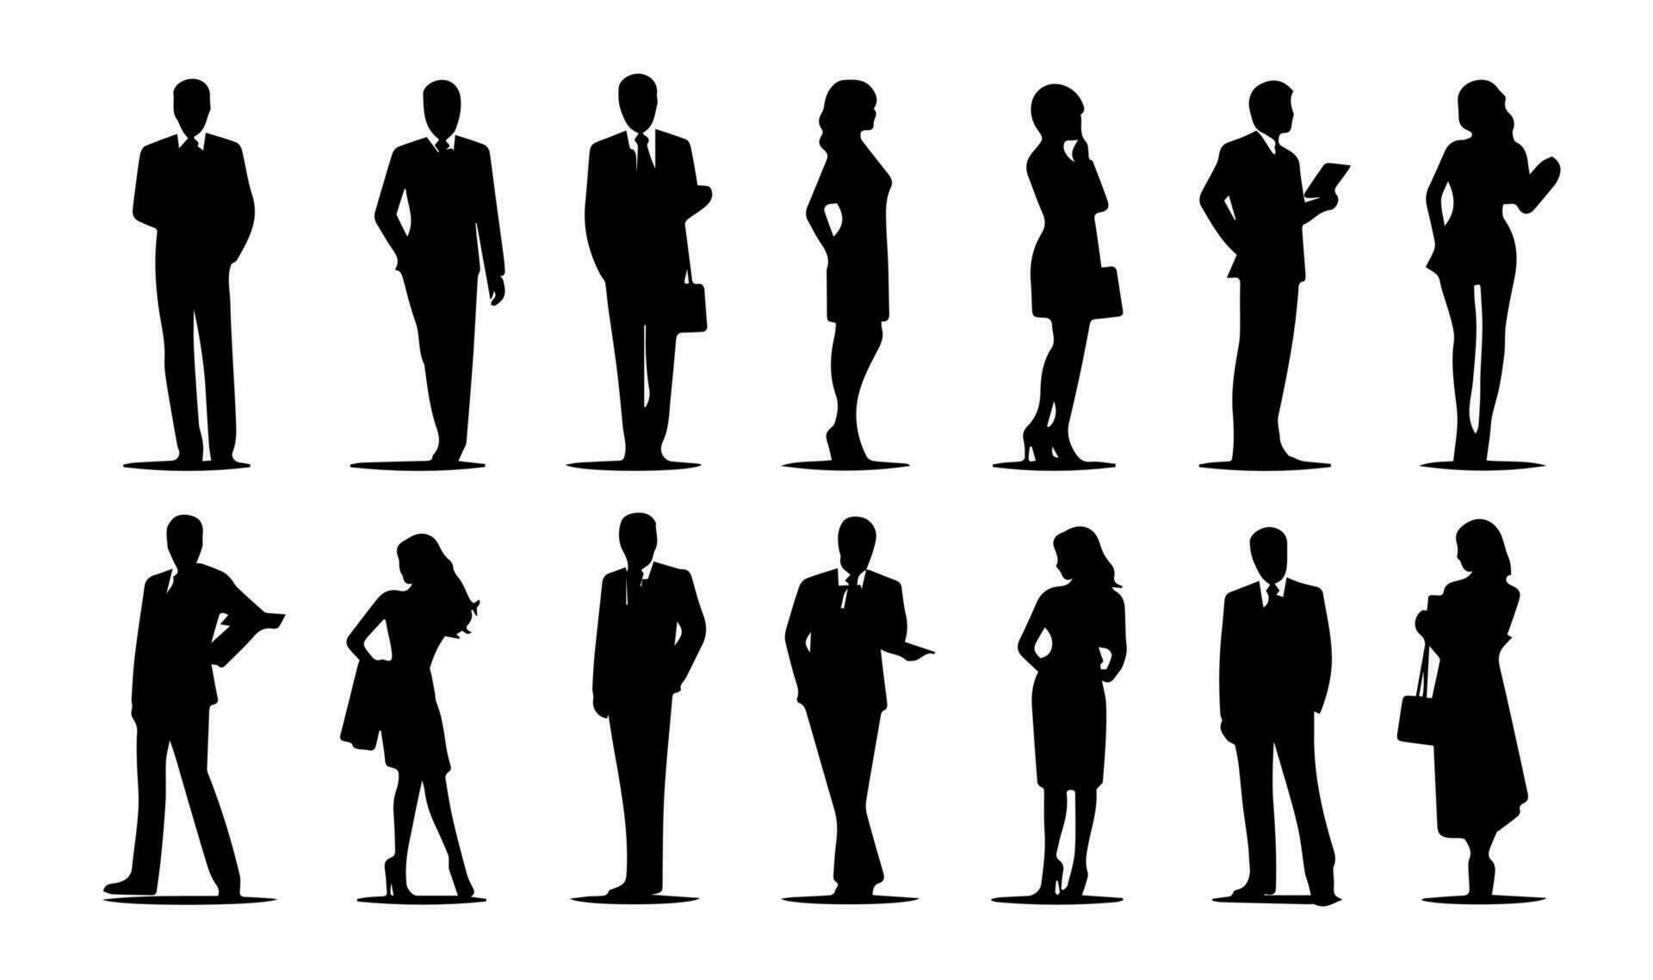 Silhouettes of business people in various poses. Vector illustration.